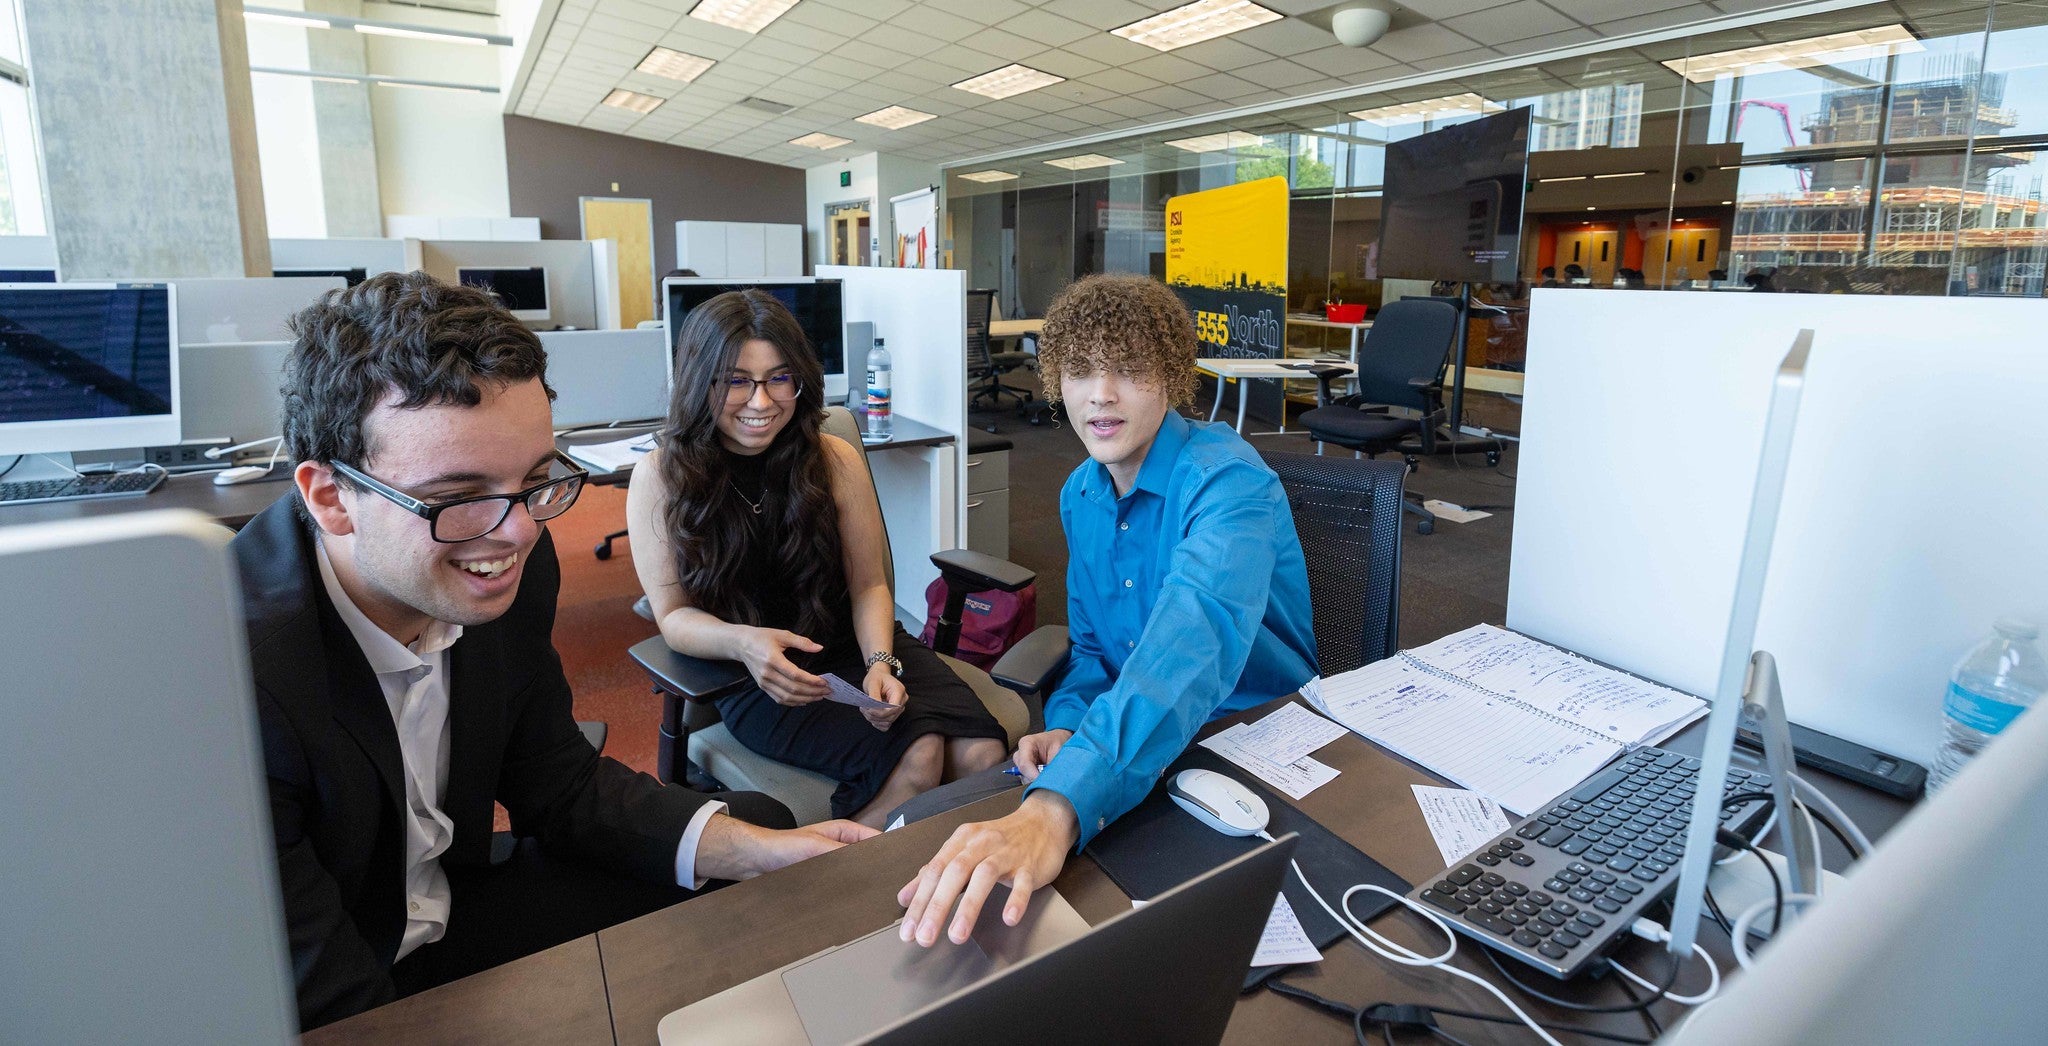 Students collaborate together on how to best serve one of the clients they are collaborating with at the Cronkite Agency.